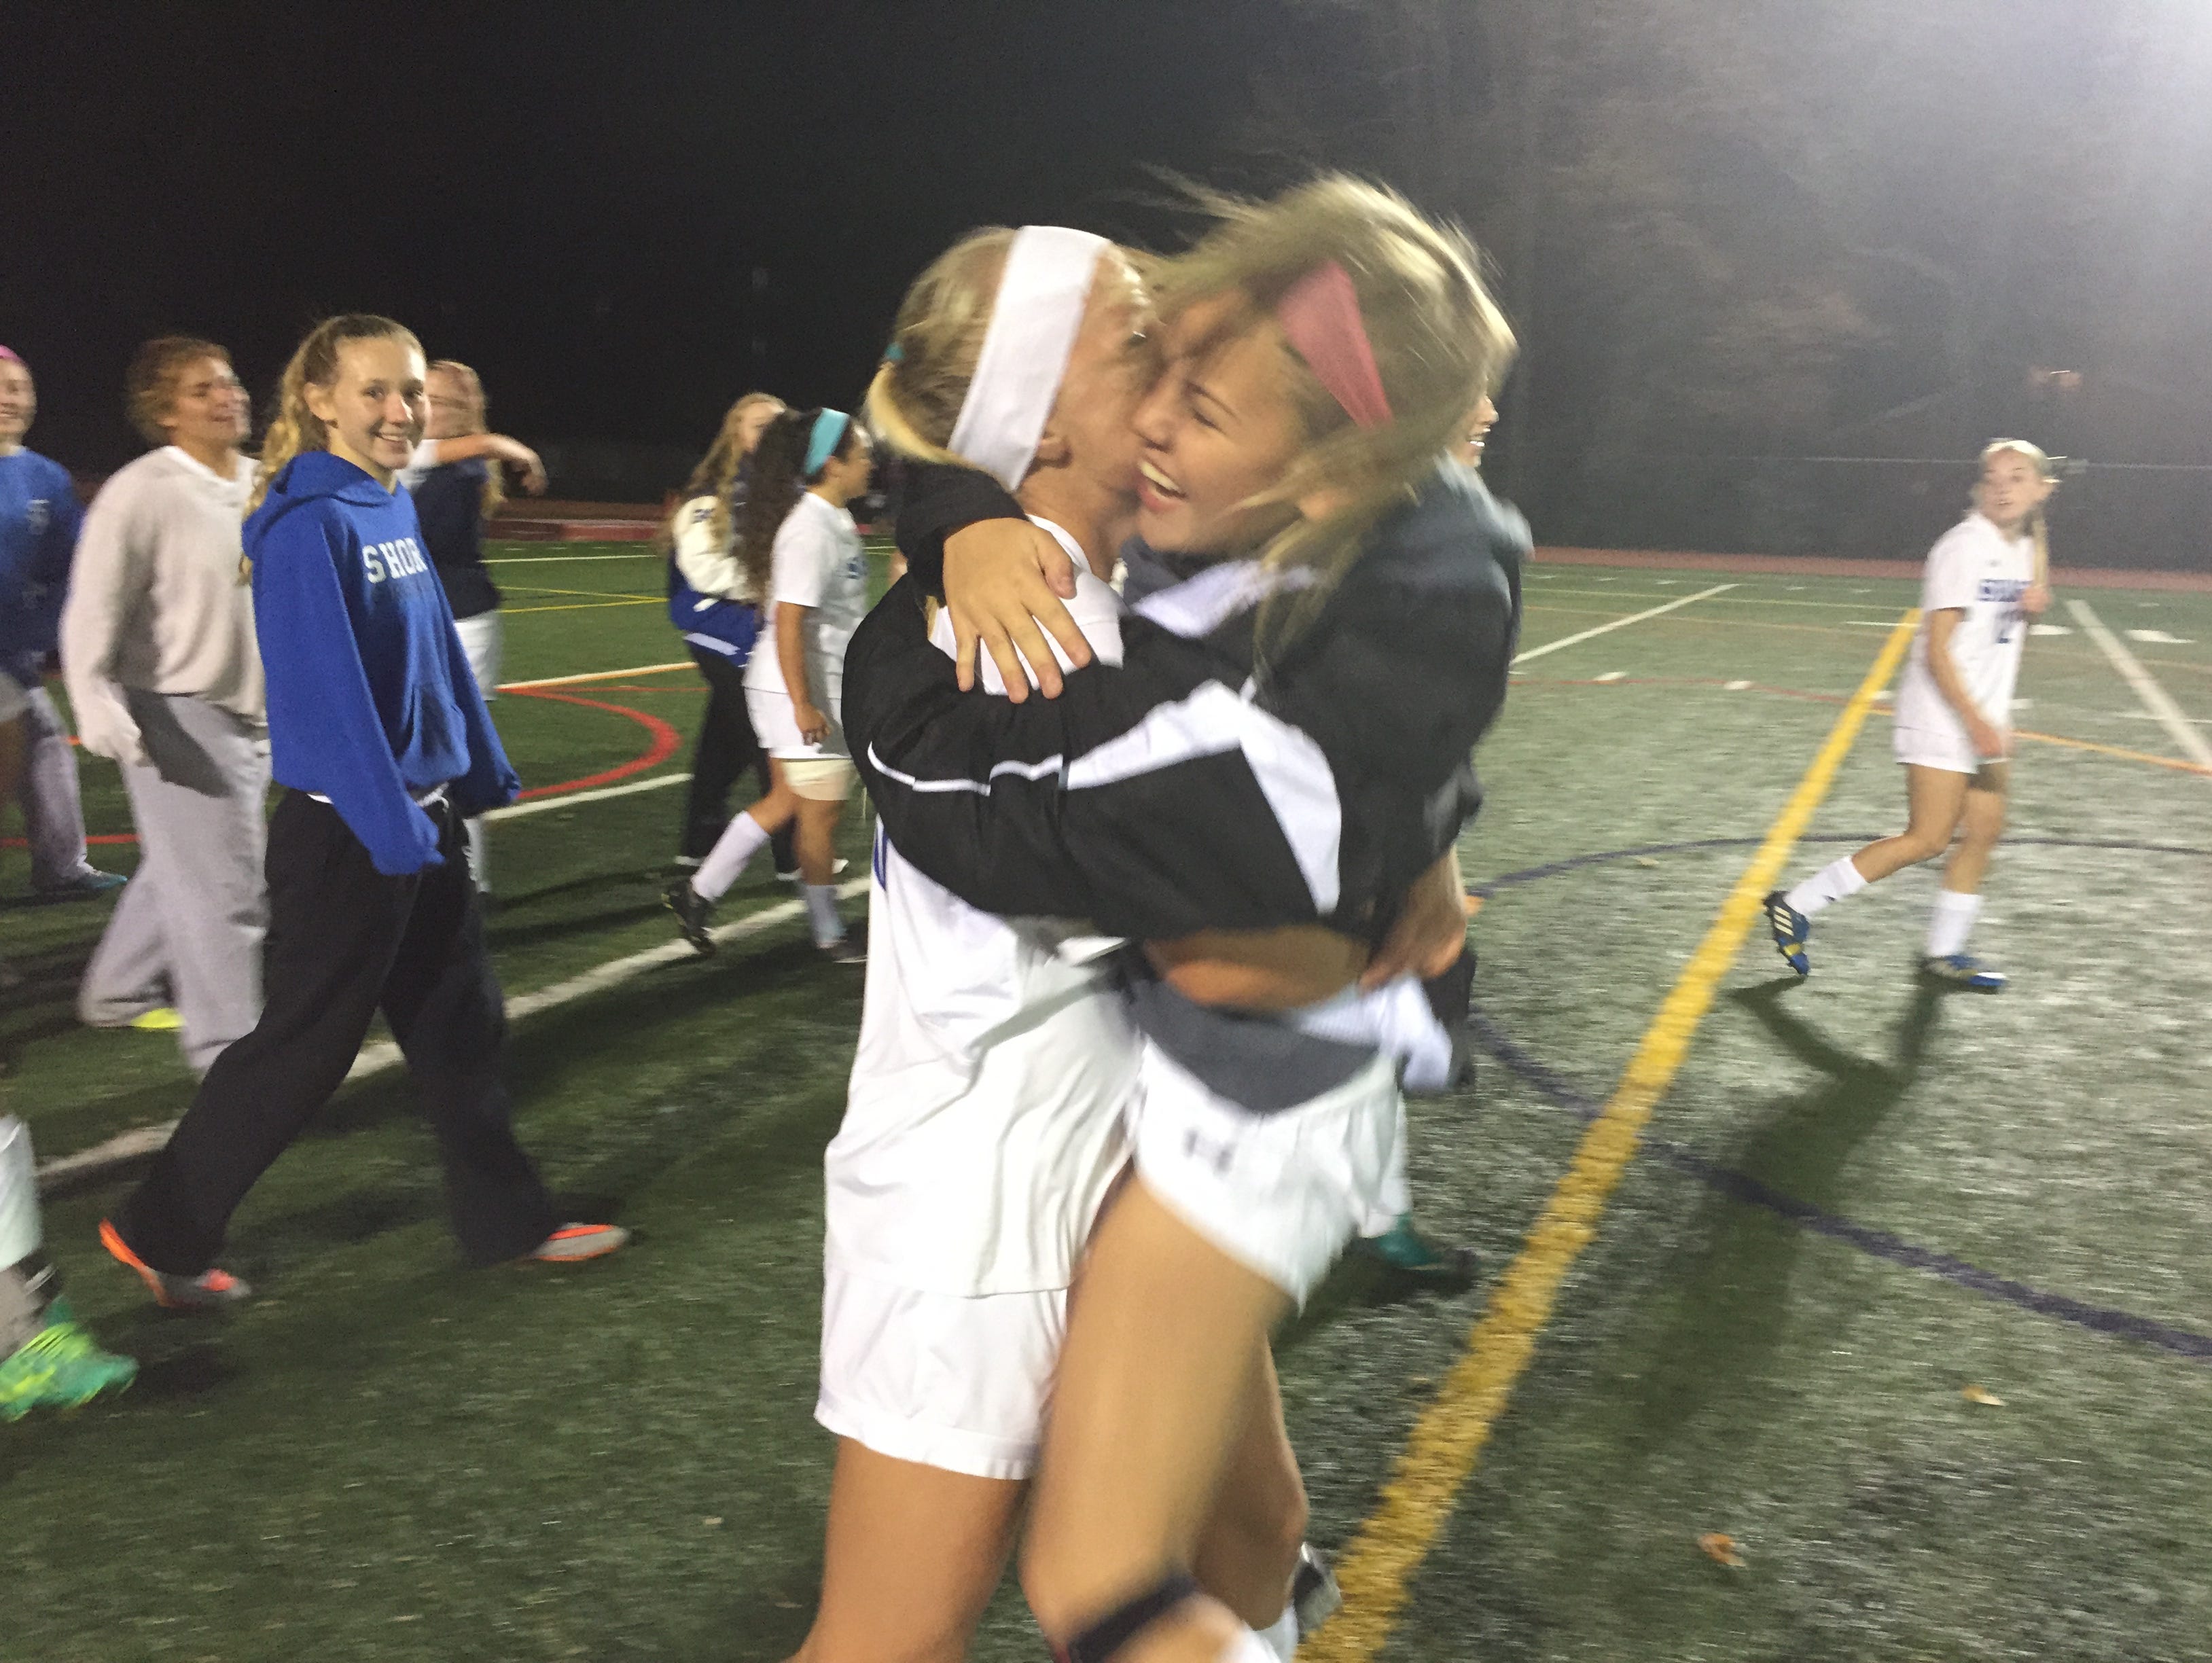 Shore Regional players celebrate their 2-1 win over Haddon Heights.